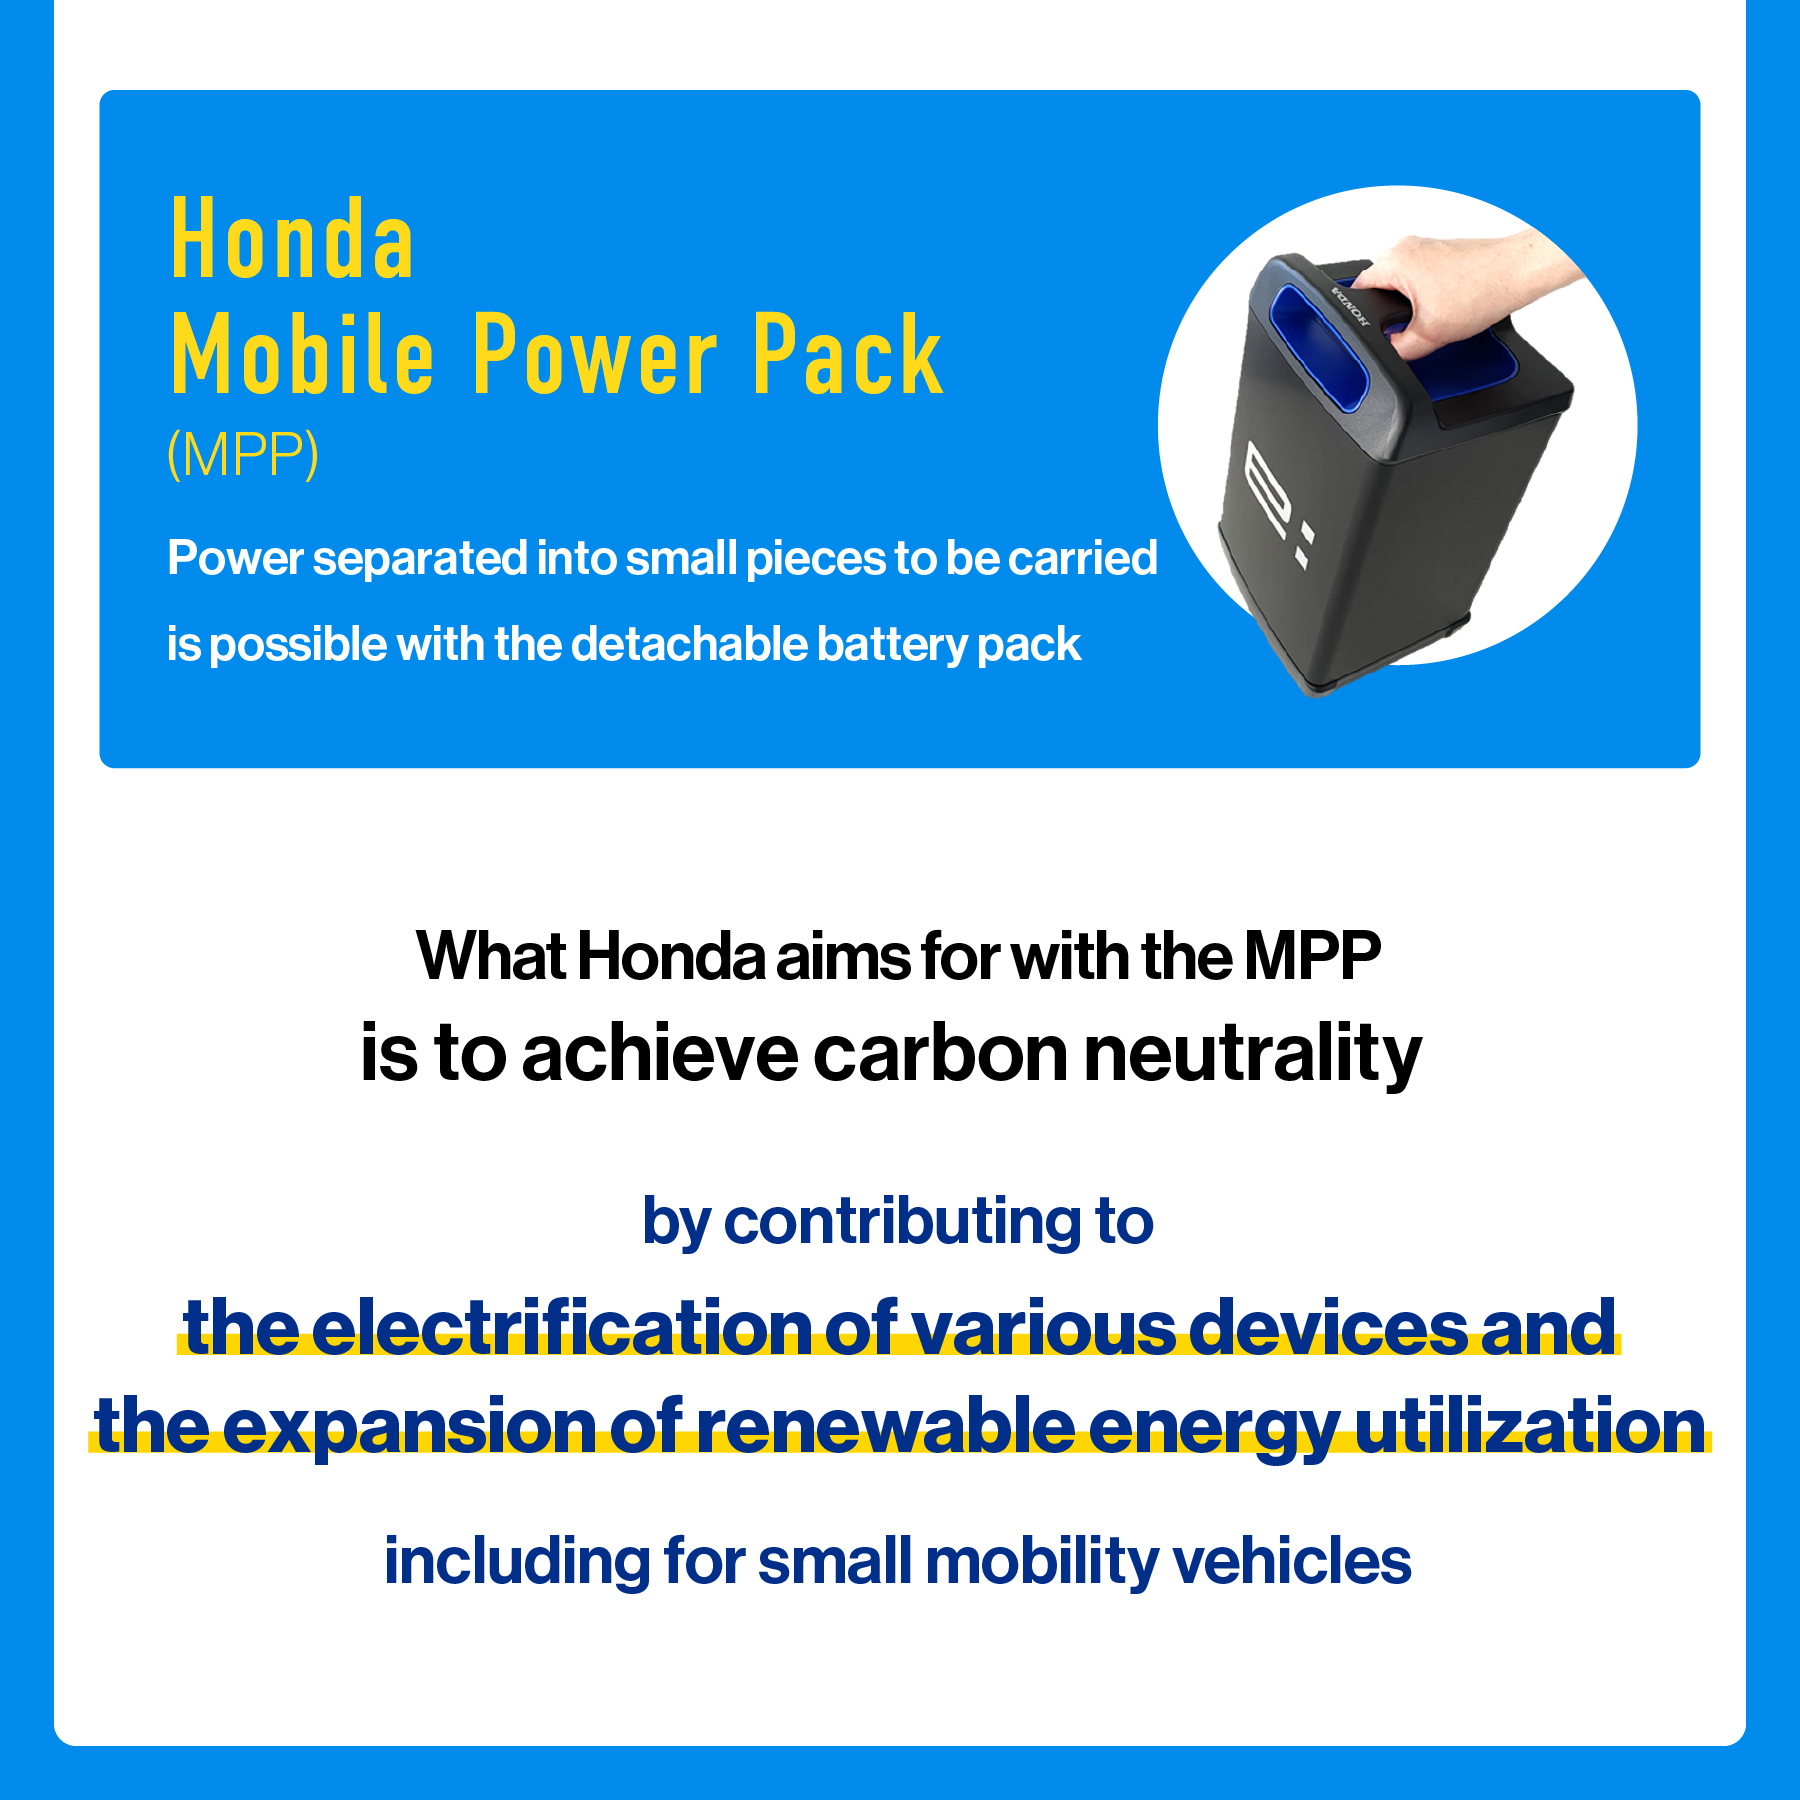 What Honda aims for with the Mobile Power Pack is the electrification of various devices and the expansion of renewable energy utilization